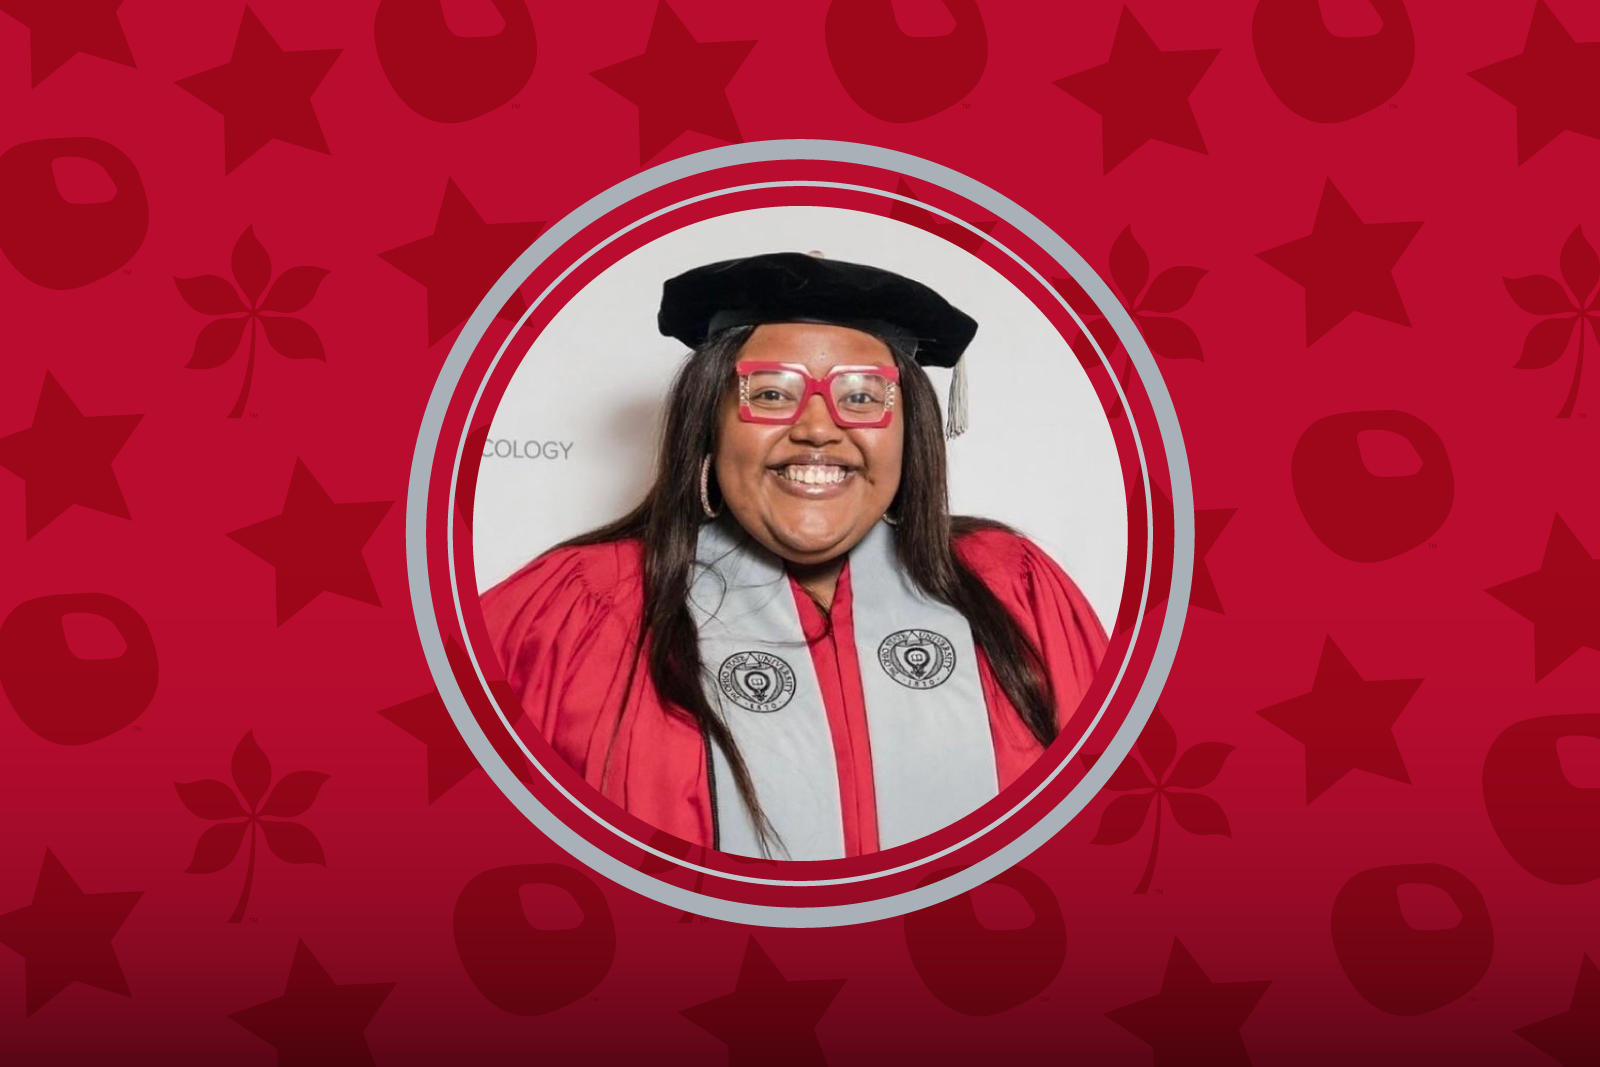 Bryanna Stigger in a circle with grey outline on top of a scarlet background with buckeye shapes and stars.